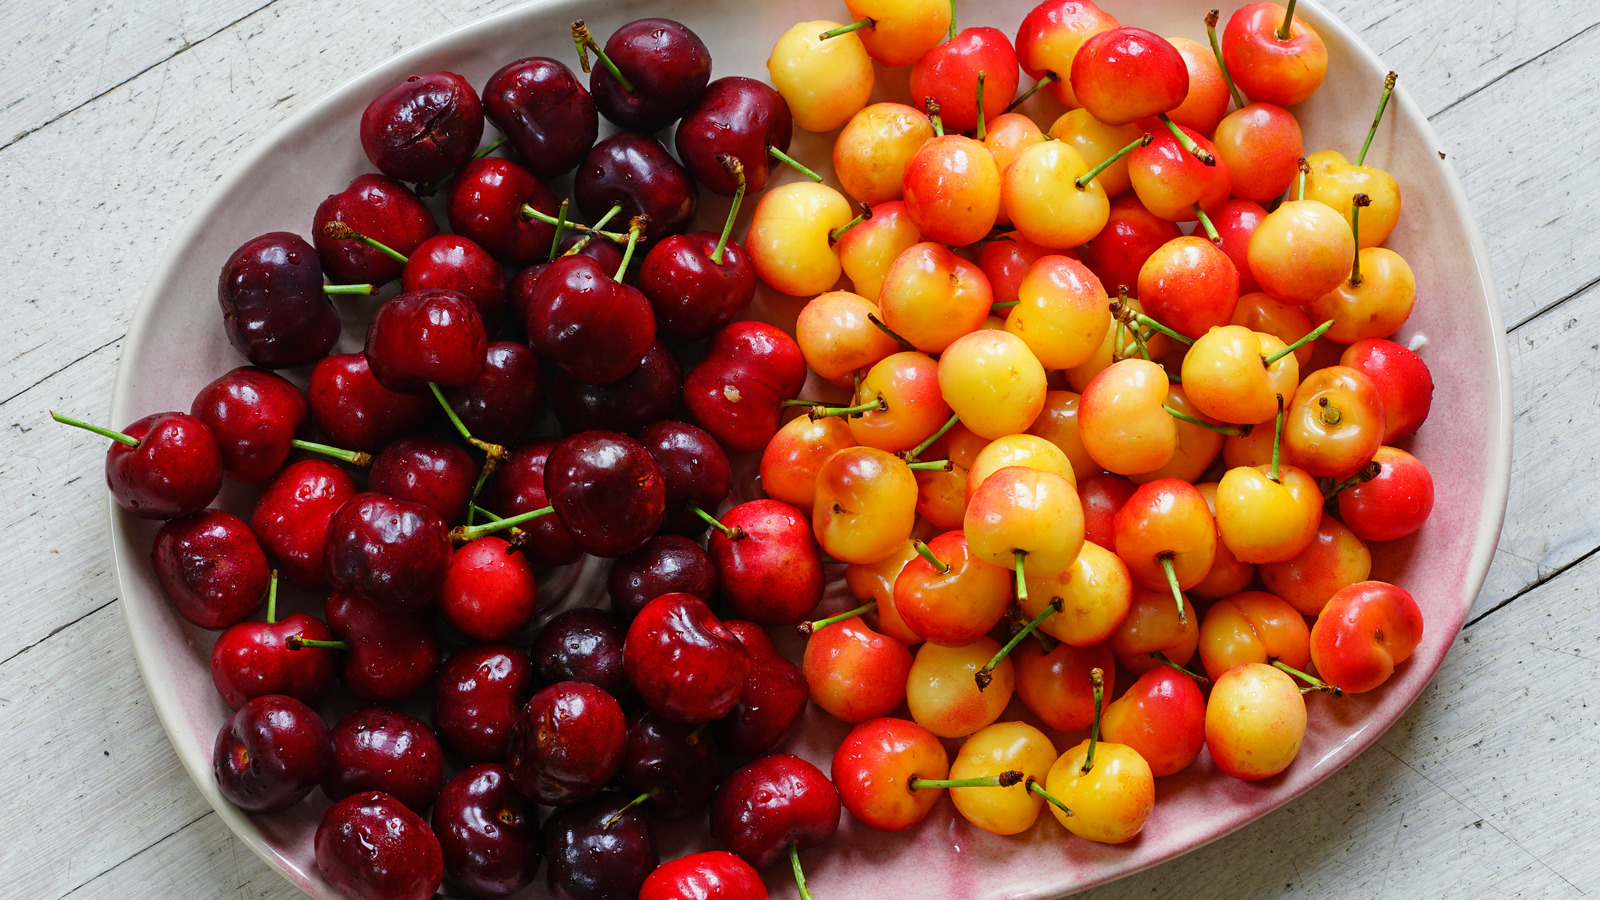 ORIGINAL HYBRID Sweet Red Cherry Delicious Healthy Fruit Plant